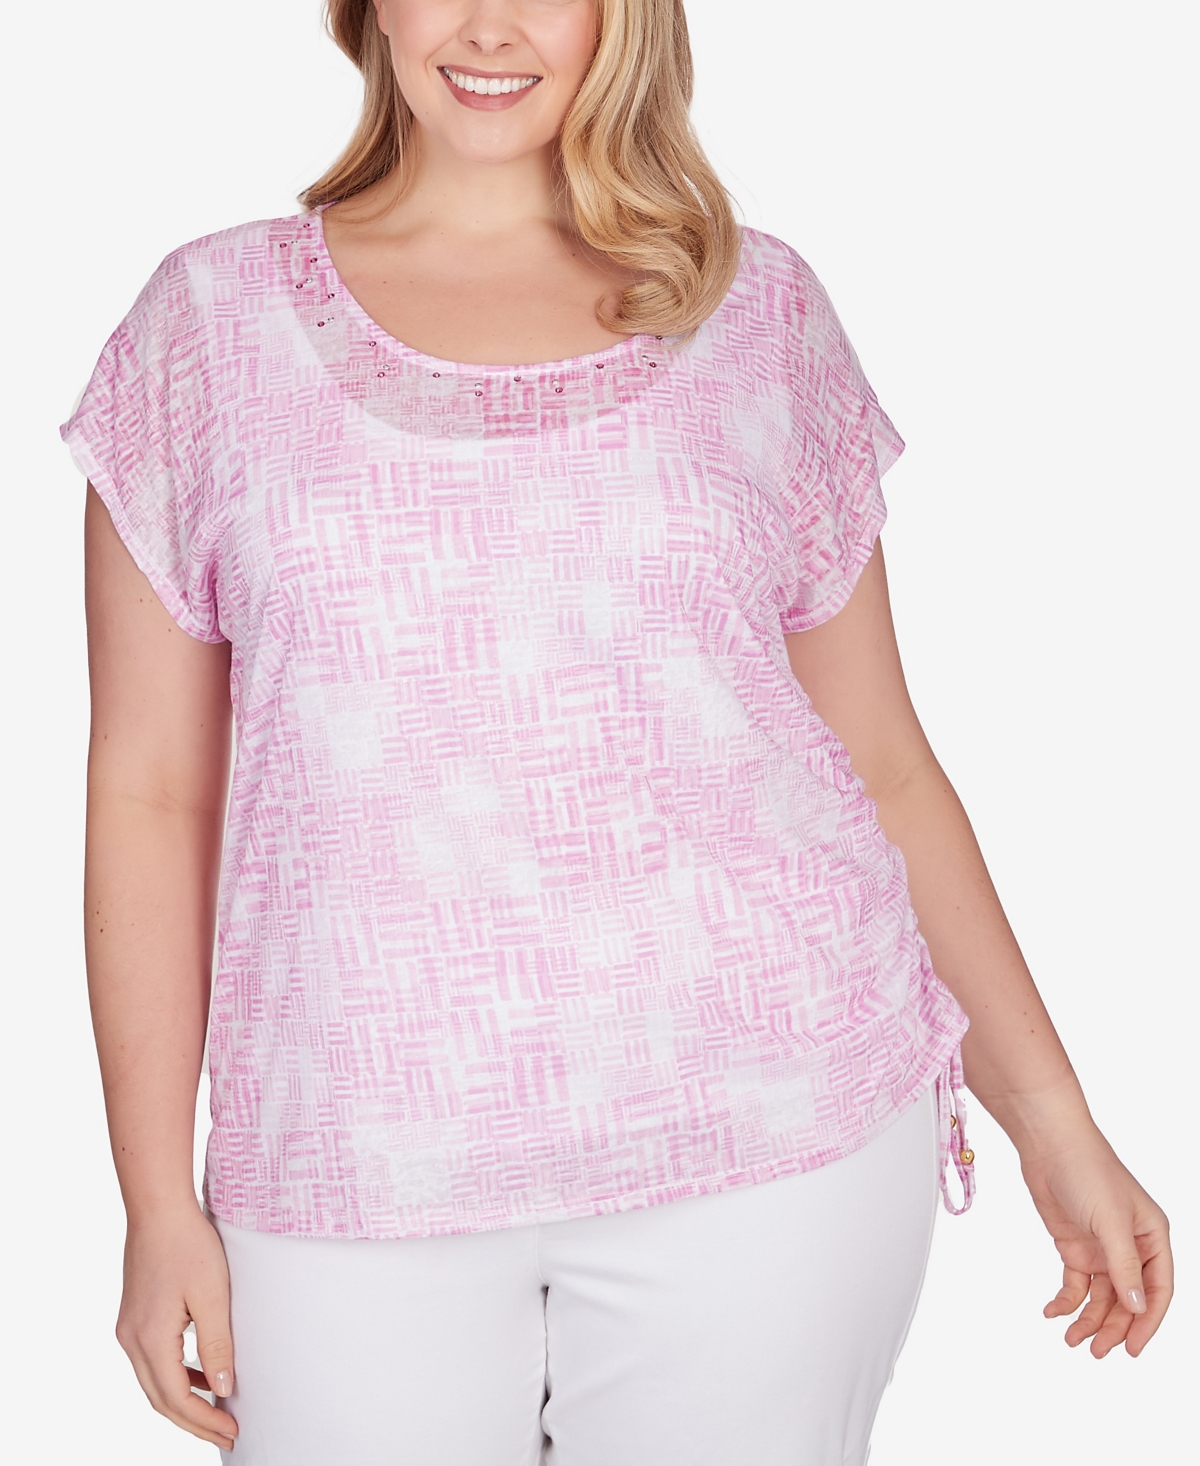 Plus Size Spring Into Action Printed Top - Orchid Multi